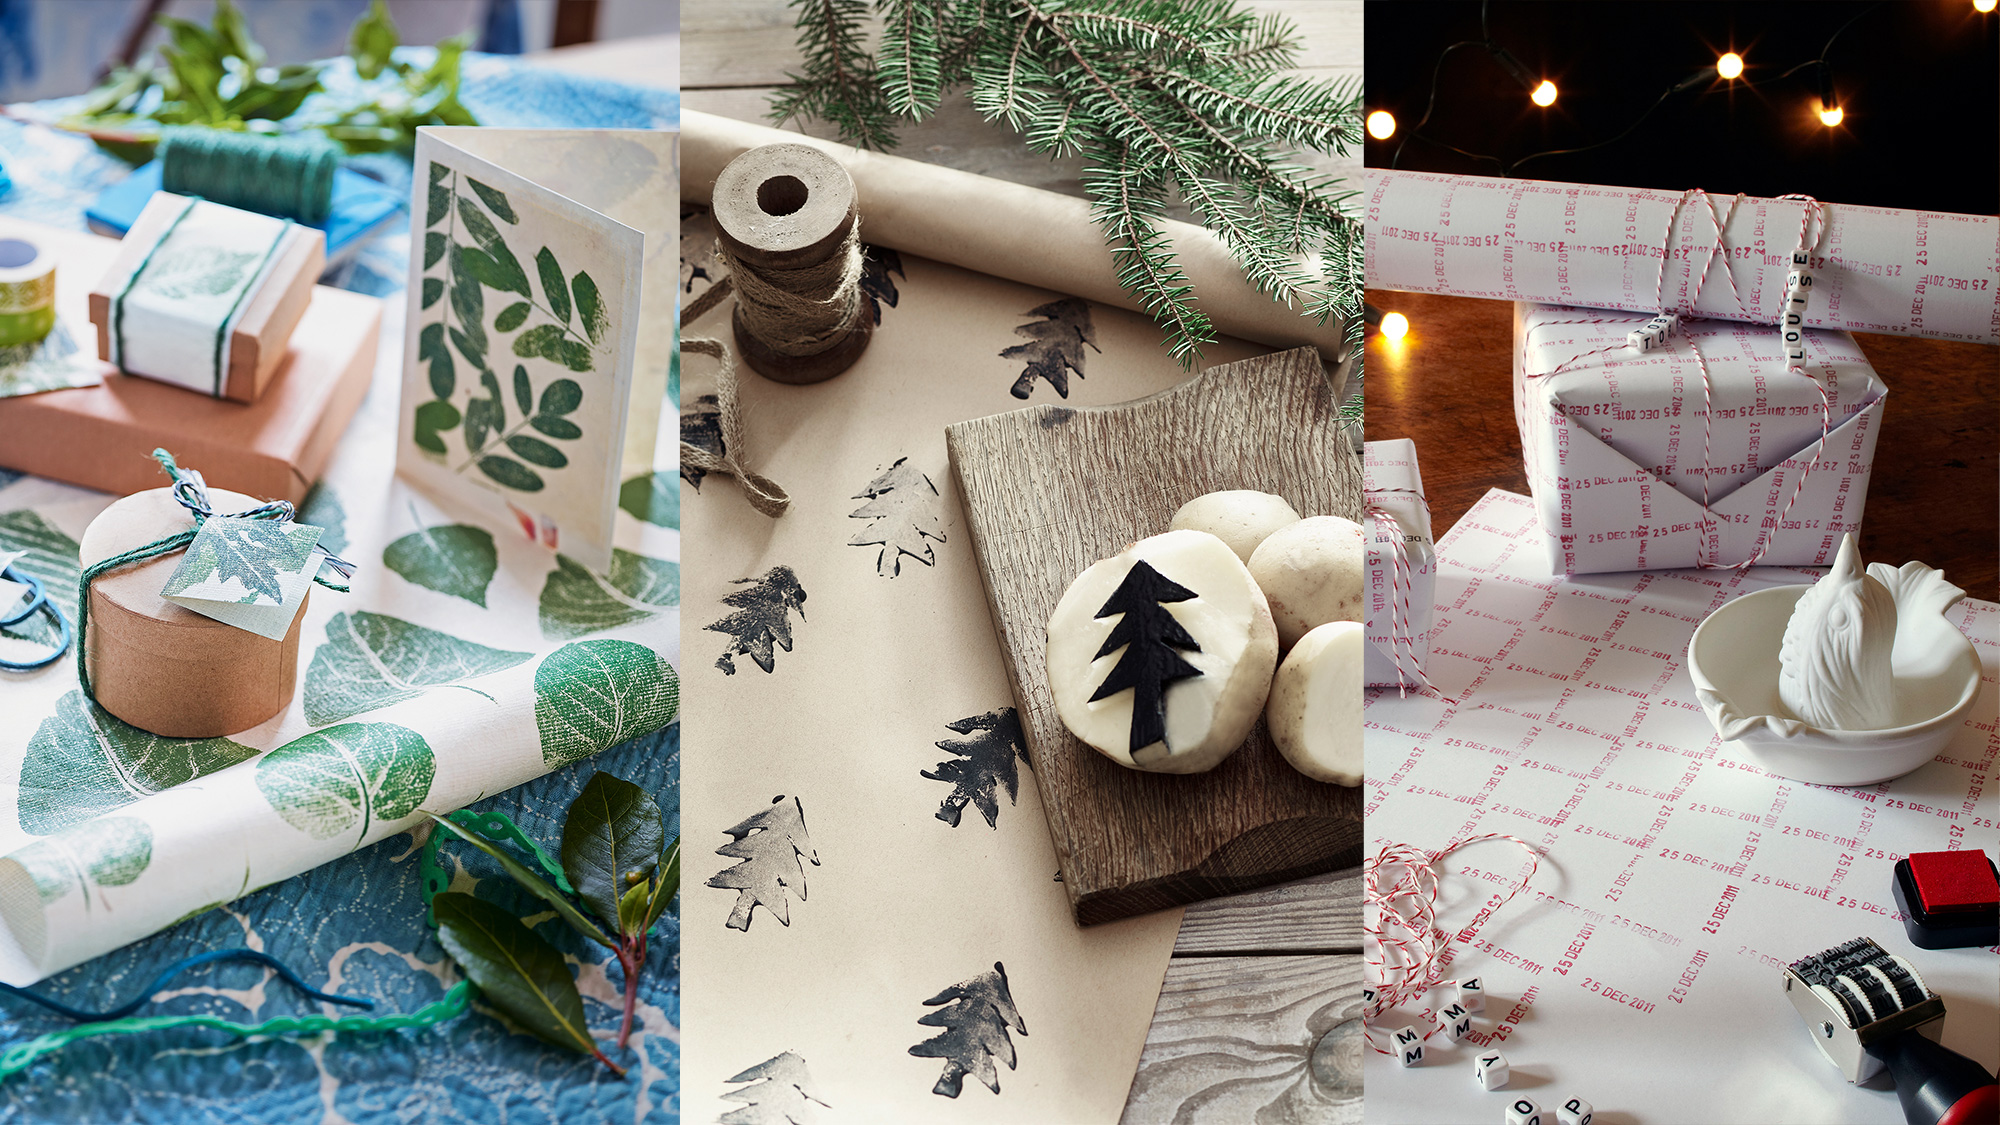 Our favourite creative ways to recycle your wrapping paper this Christmas